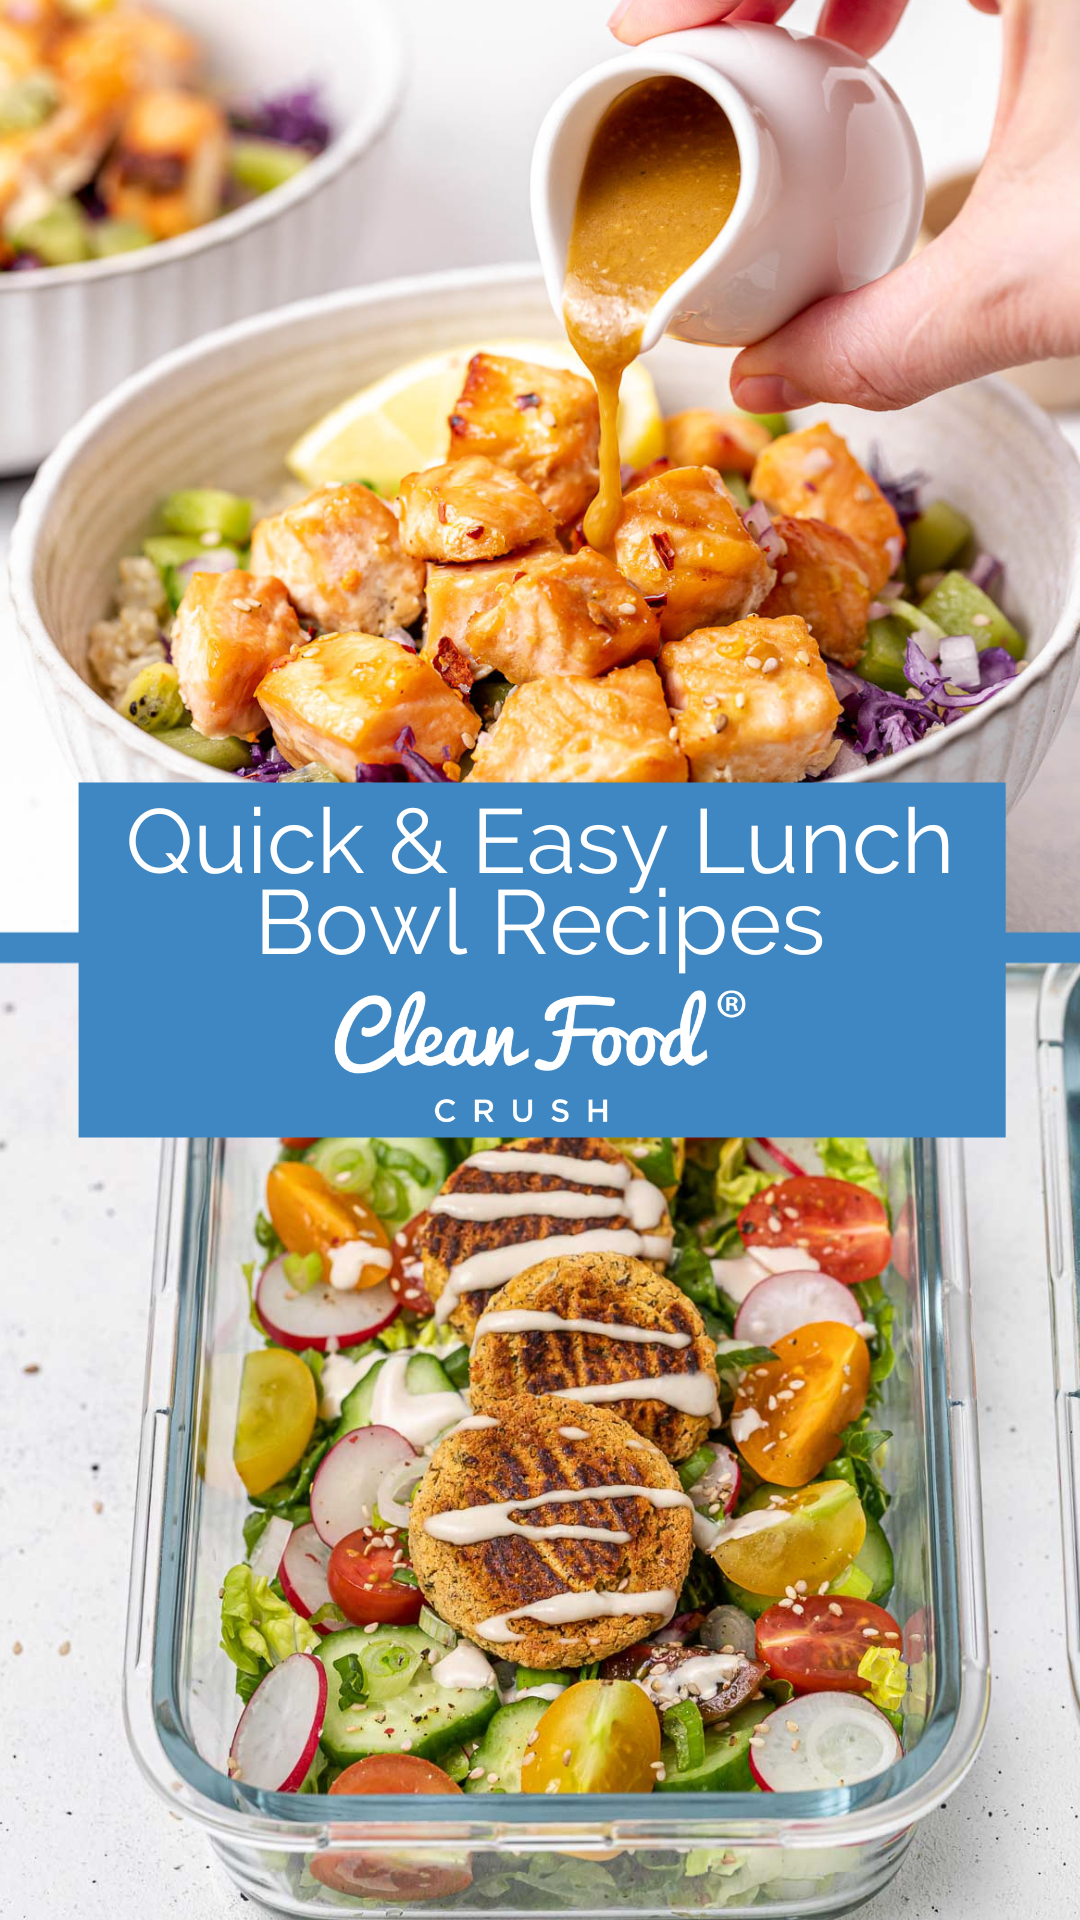 6 Steps to Creating the Perfect Lunch Bowl